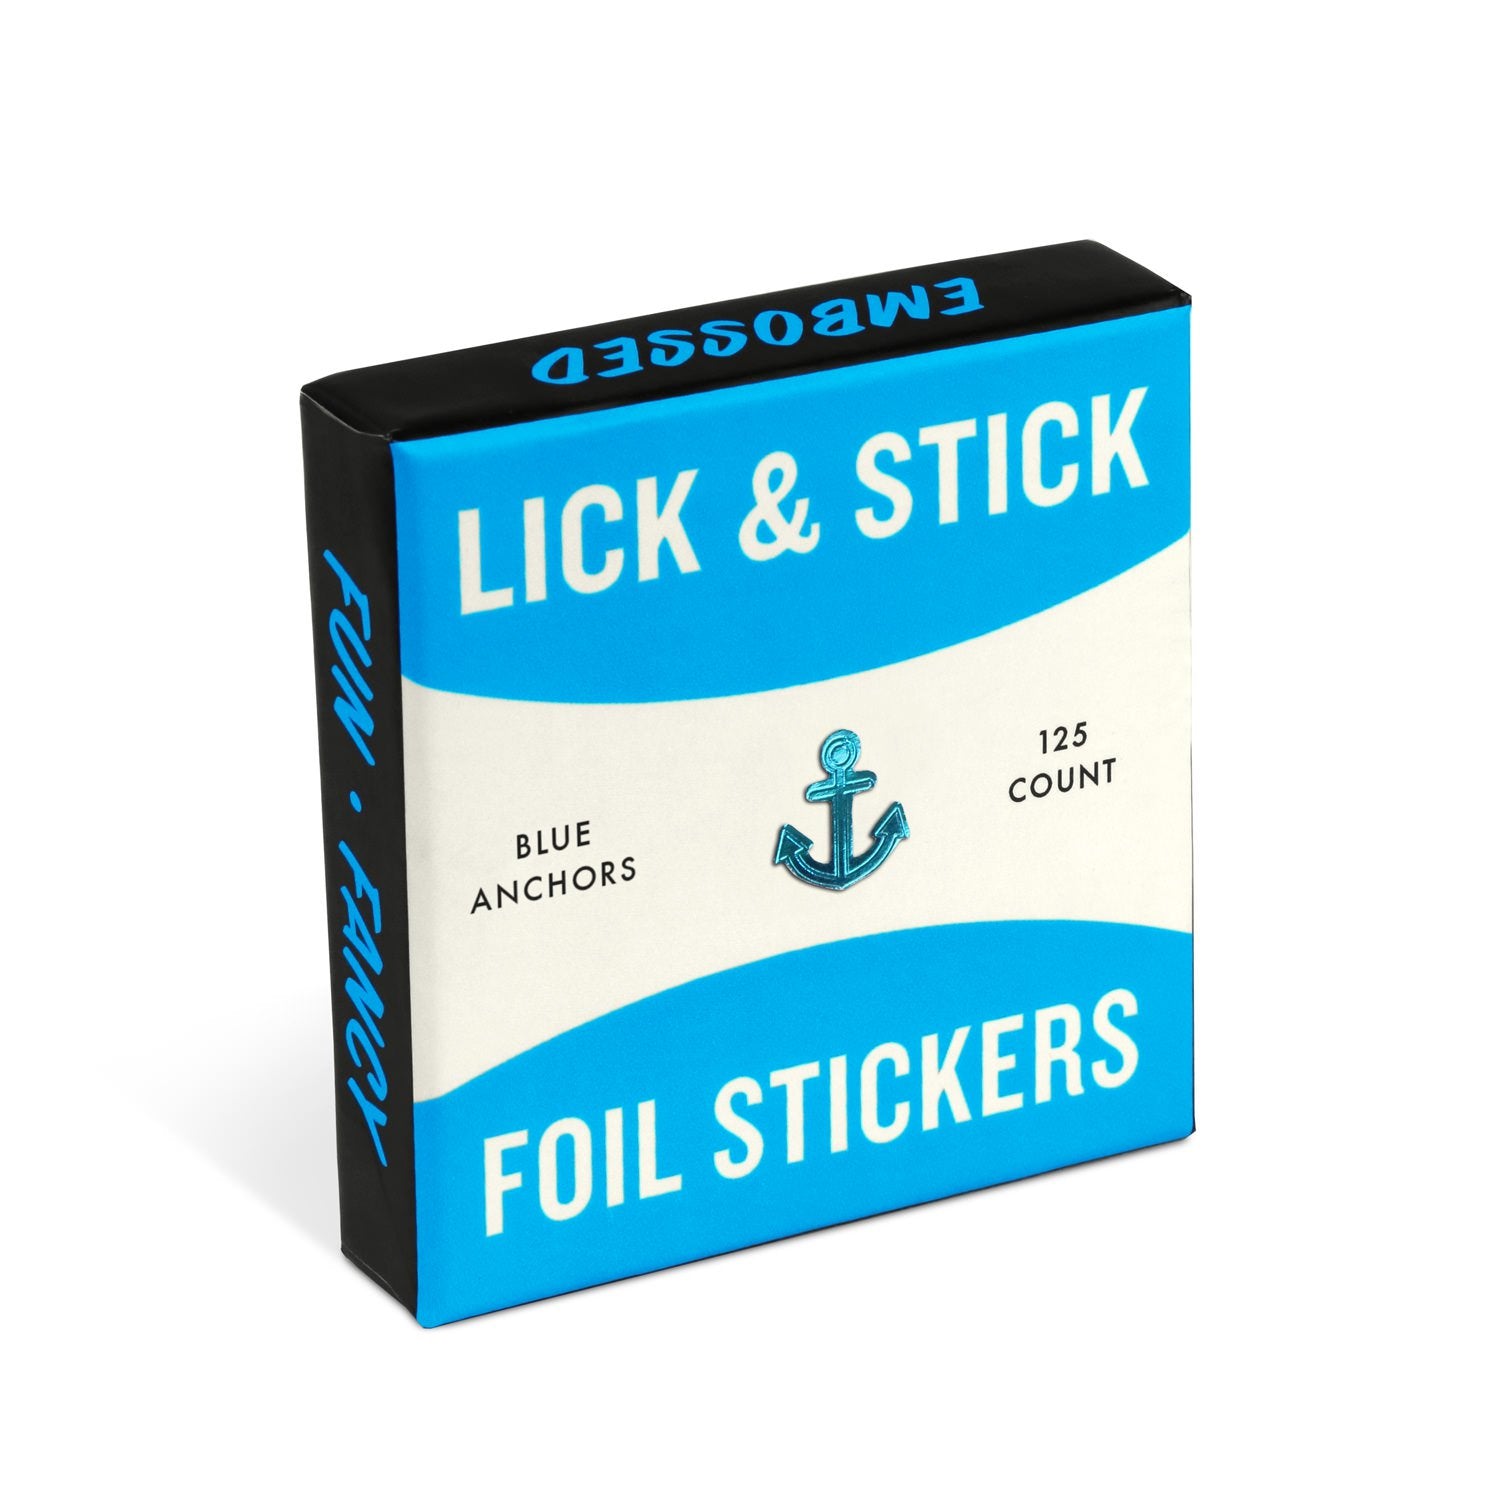 Blue Anchors Lick And Stick Foil Stickers